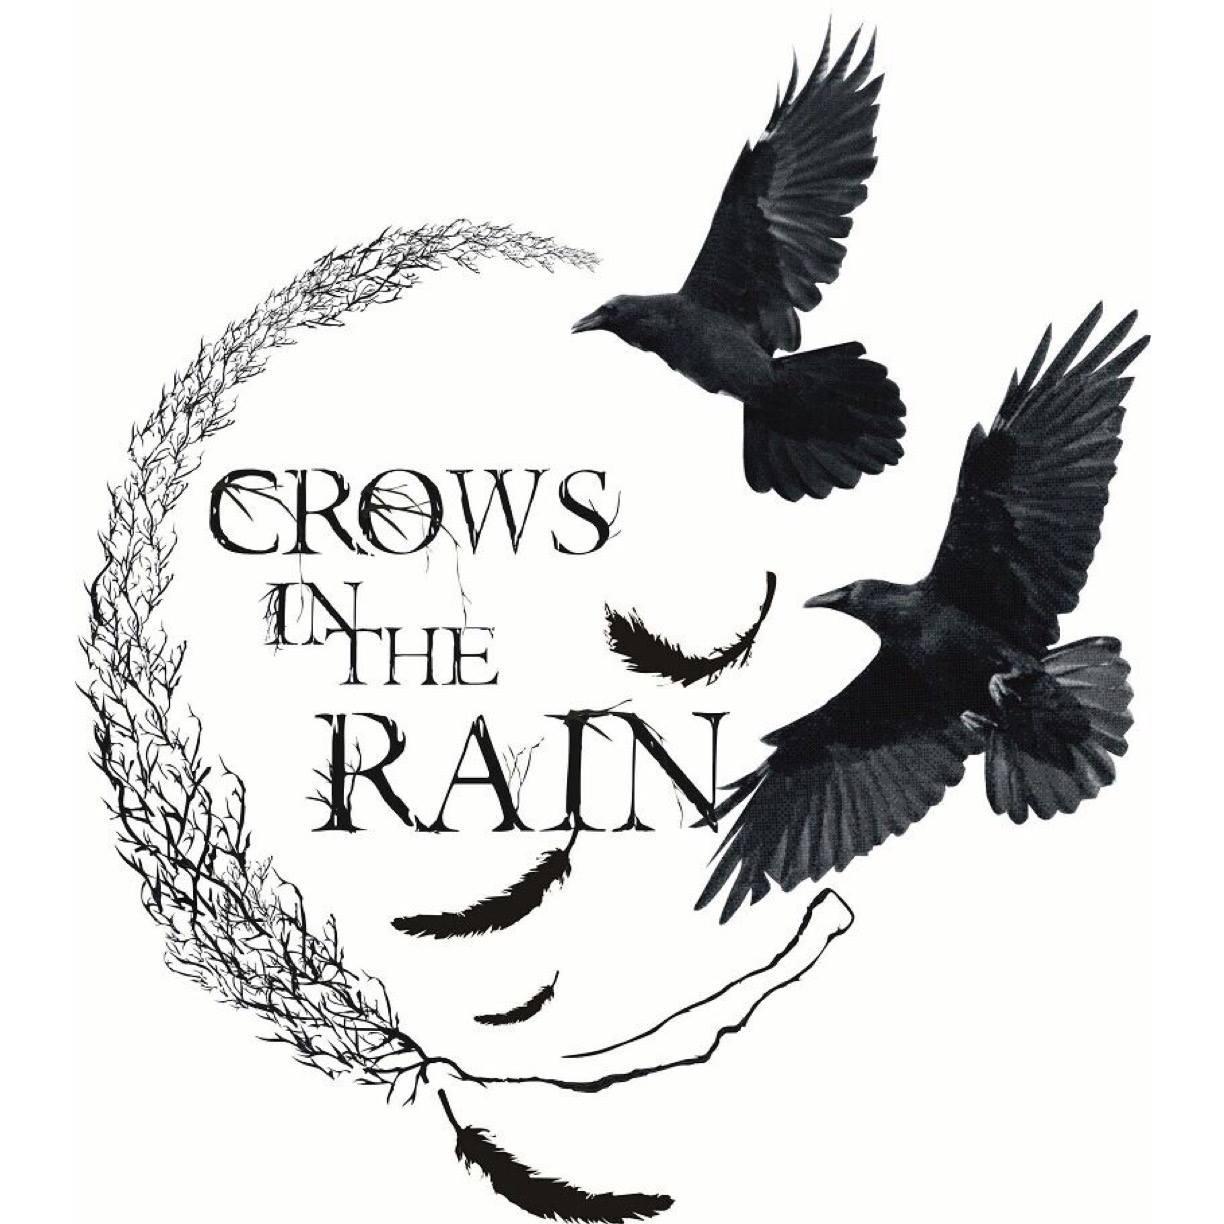 Crows in the rain